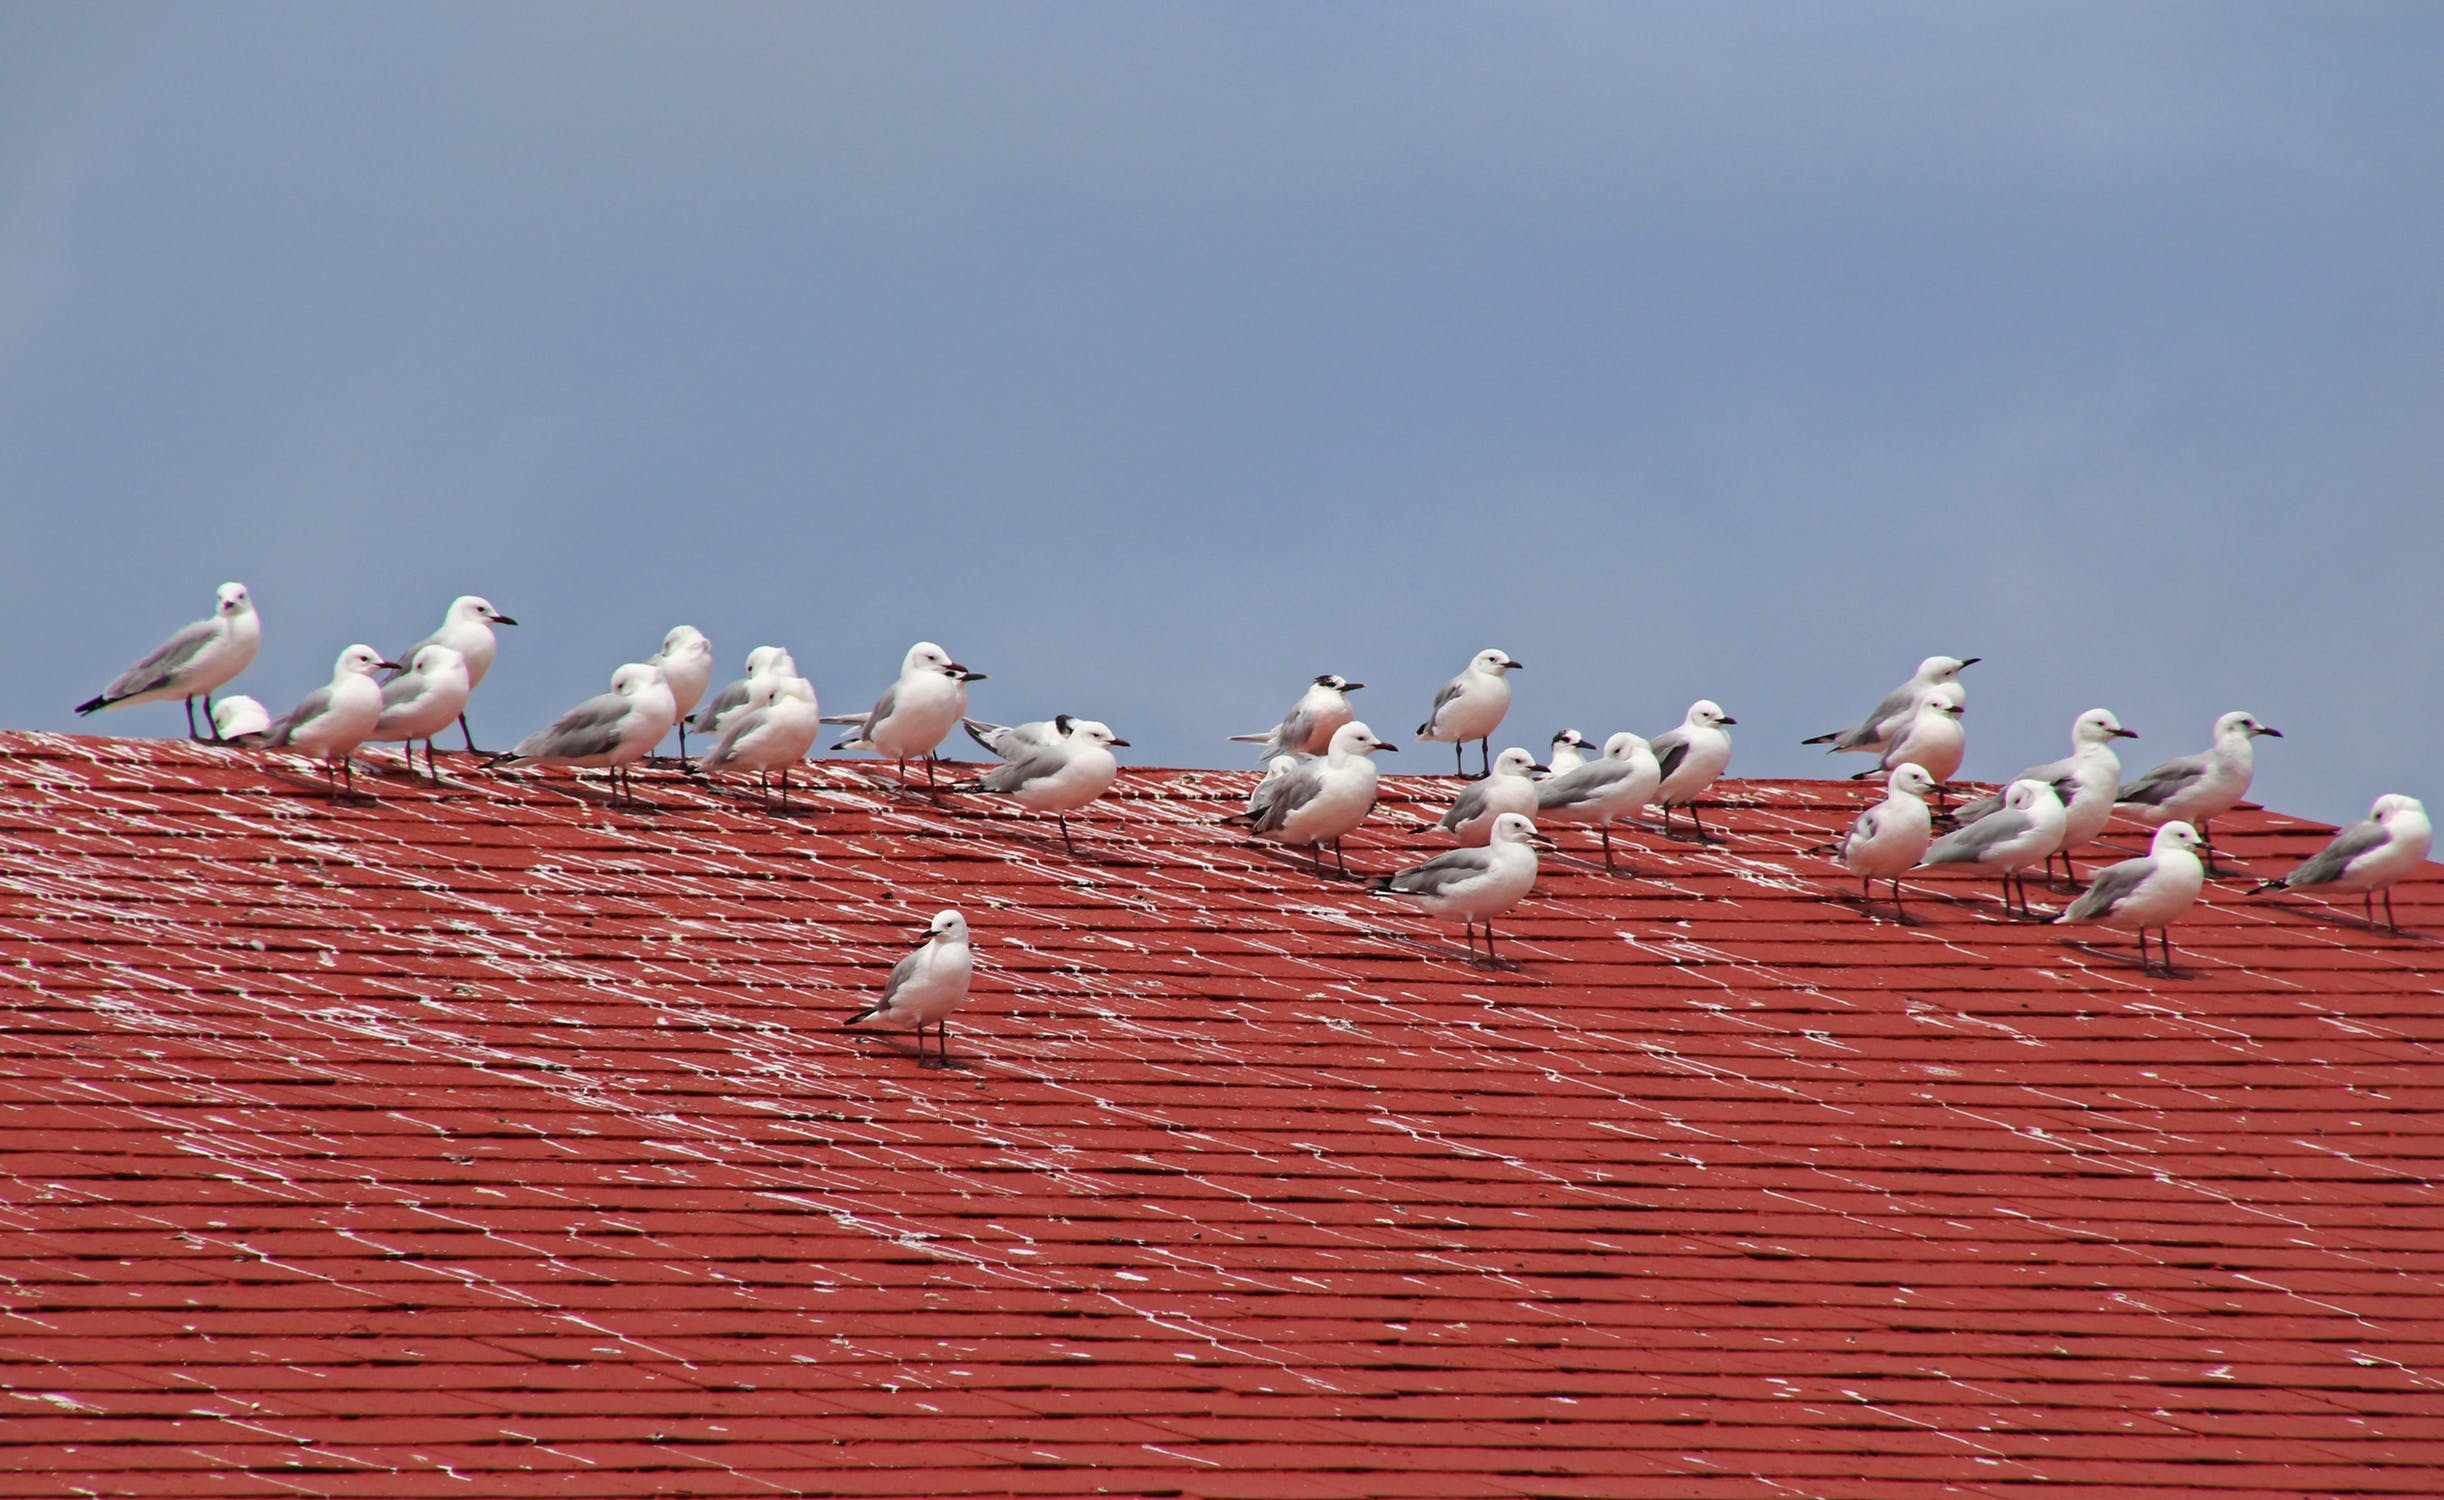 Seagulls on the red roof photo